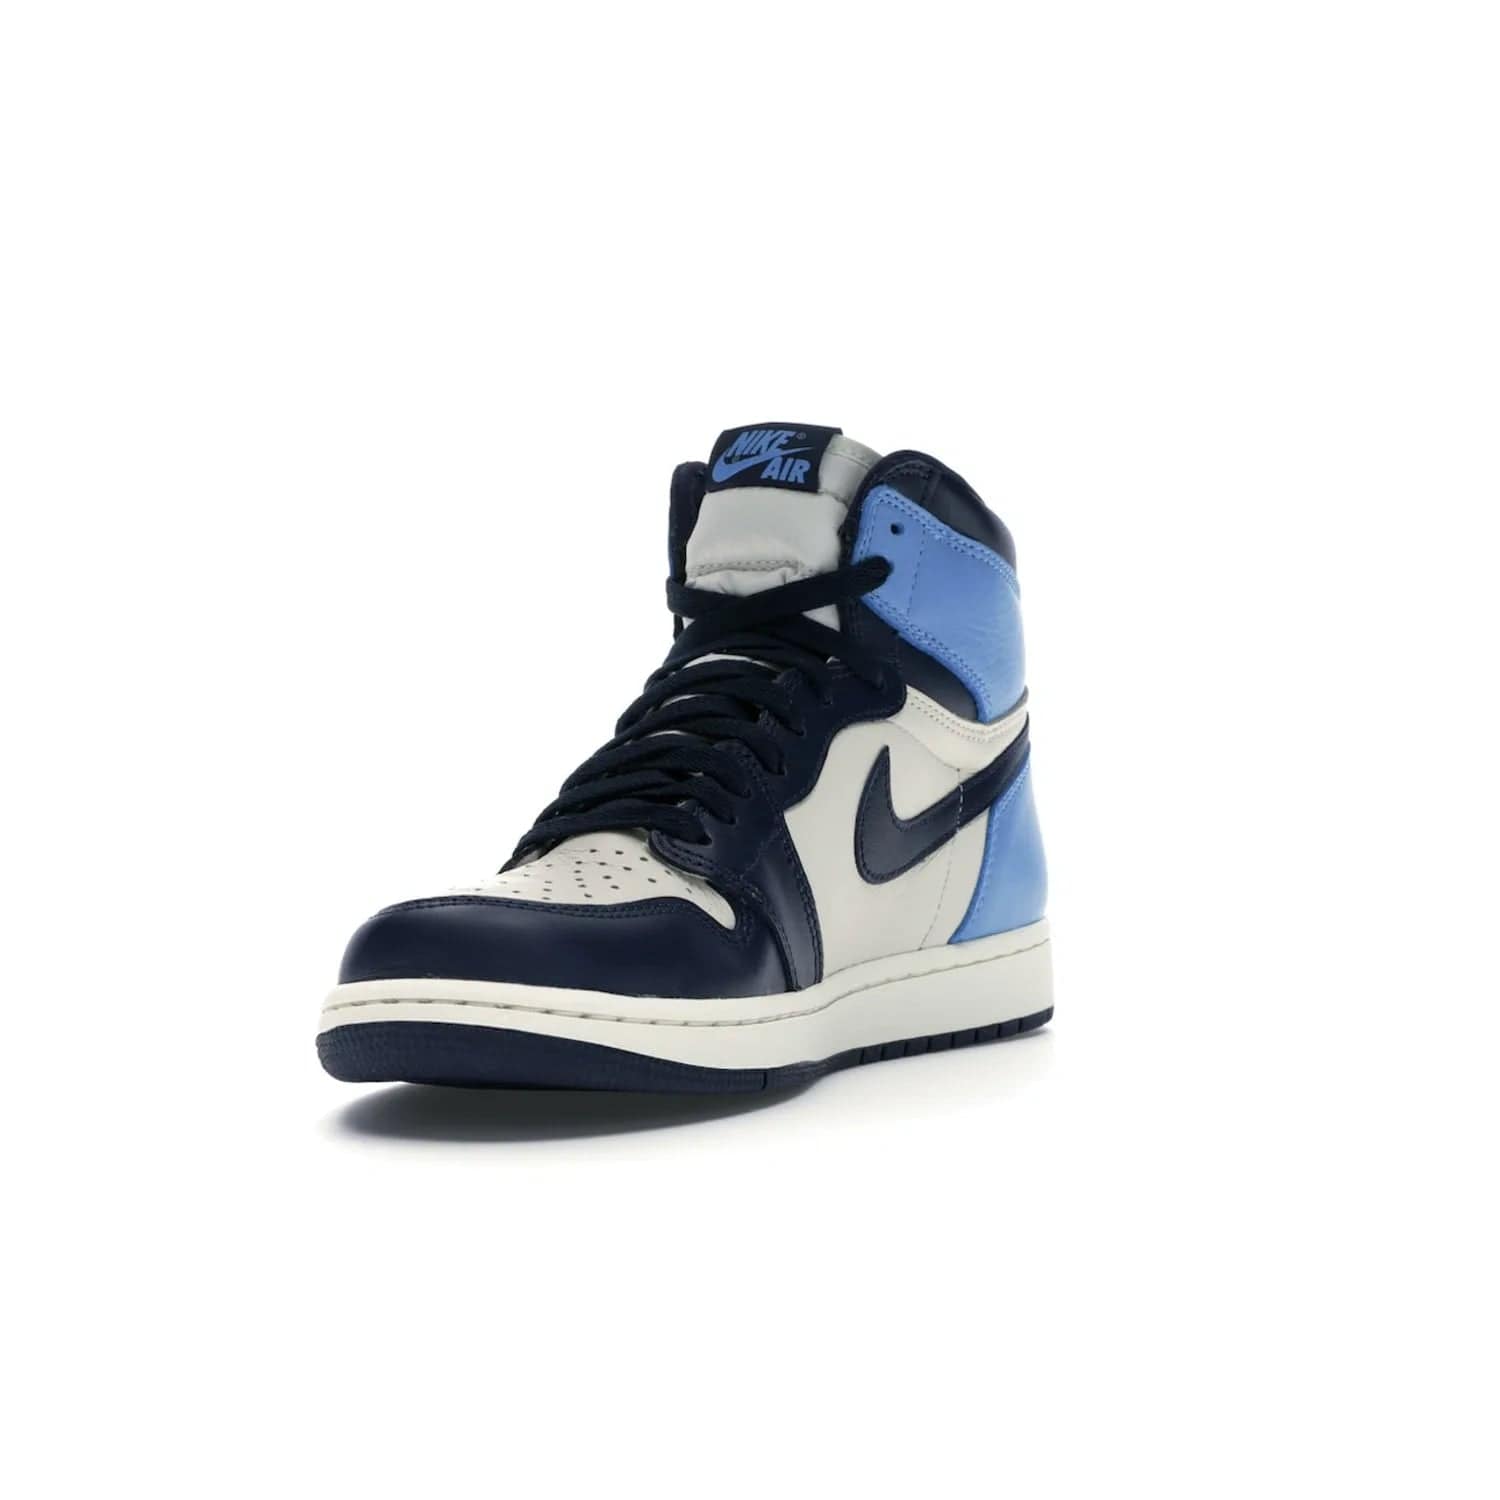 Jordan 1 Retro High Obsidian UNC - Image 13 - Only at www.BallersClubKickz.com - Bring a timeless classic to your wardrobe with the Air Jordan 1 Retro High "Obsidian/University Blue”. A full leather upper combines Obsidian and University Blue detailing for a retro Jordan style. Stitched Jumpman logo pays tribute to UNC. Experience classic style with a timeless sneaker.